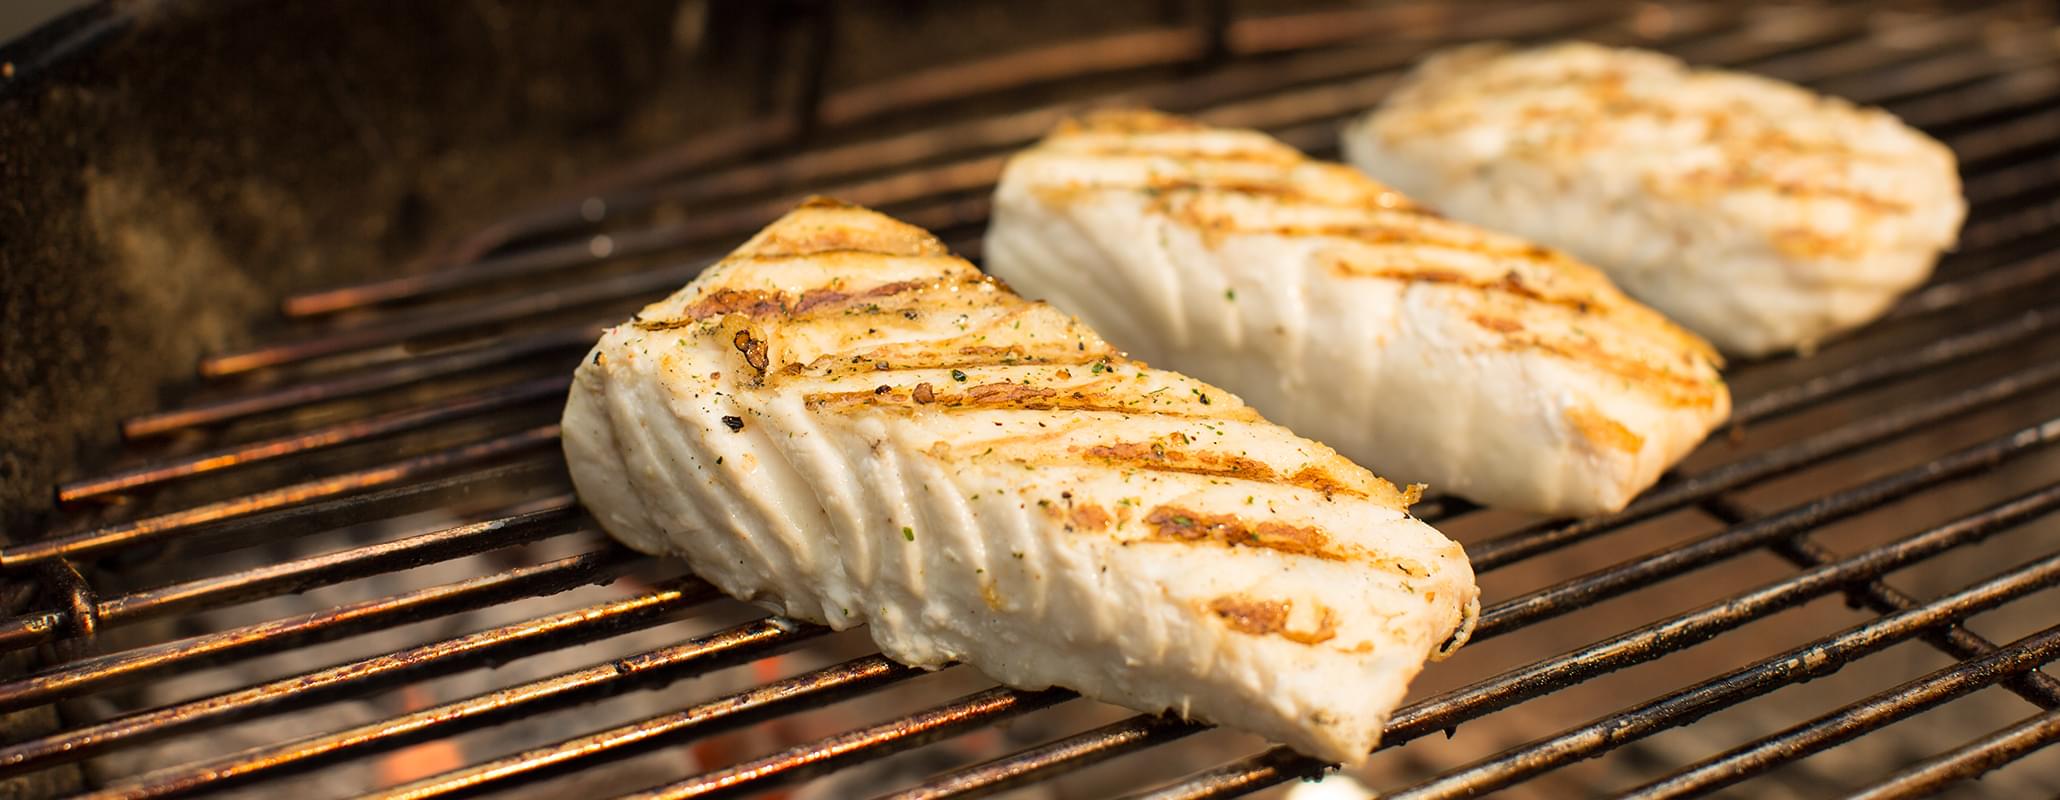 How To Fish Fillets On The Grill Kingsford